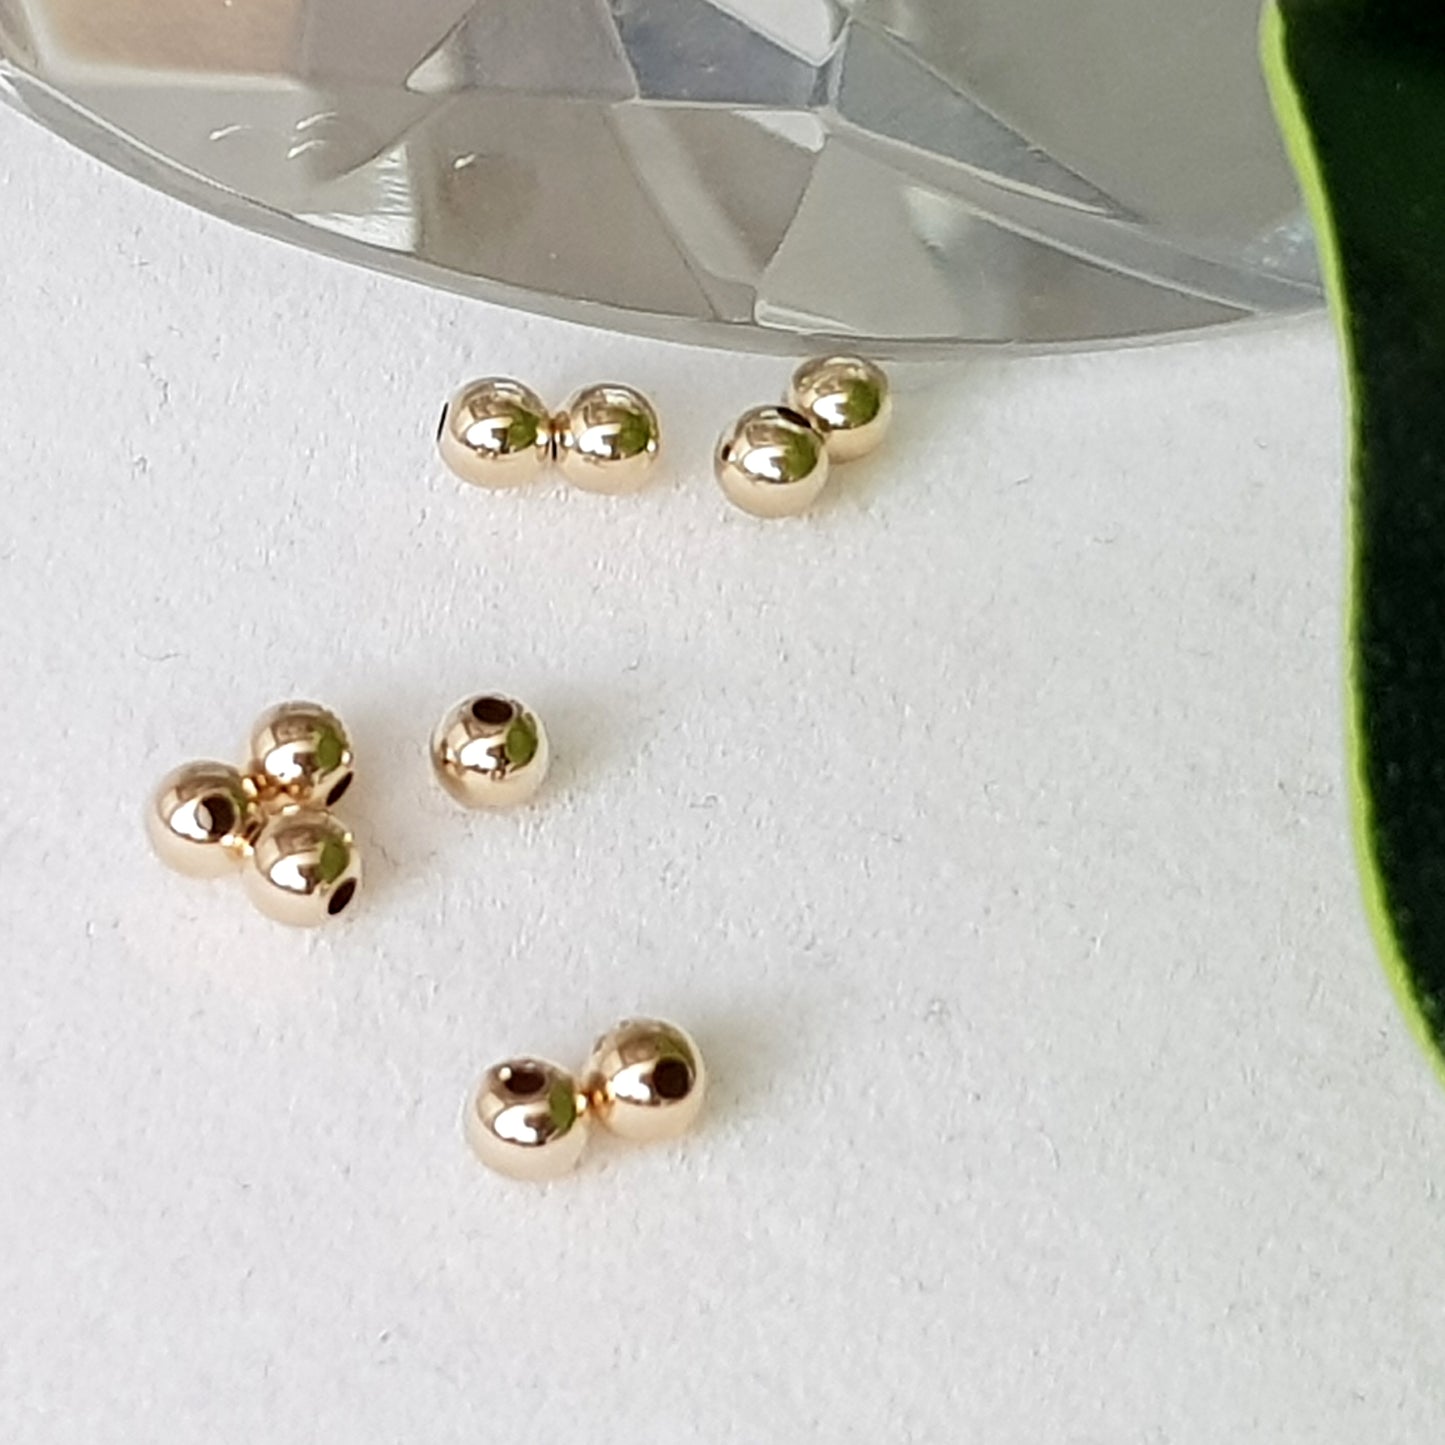 Genuine Solid Yellow Gold Findings - 14ct Plain Round Beads | Precious Metal Findings